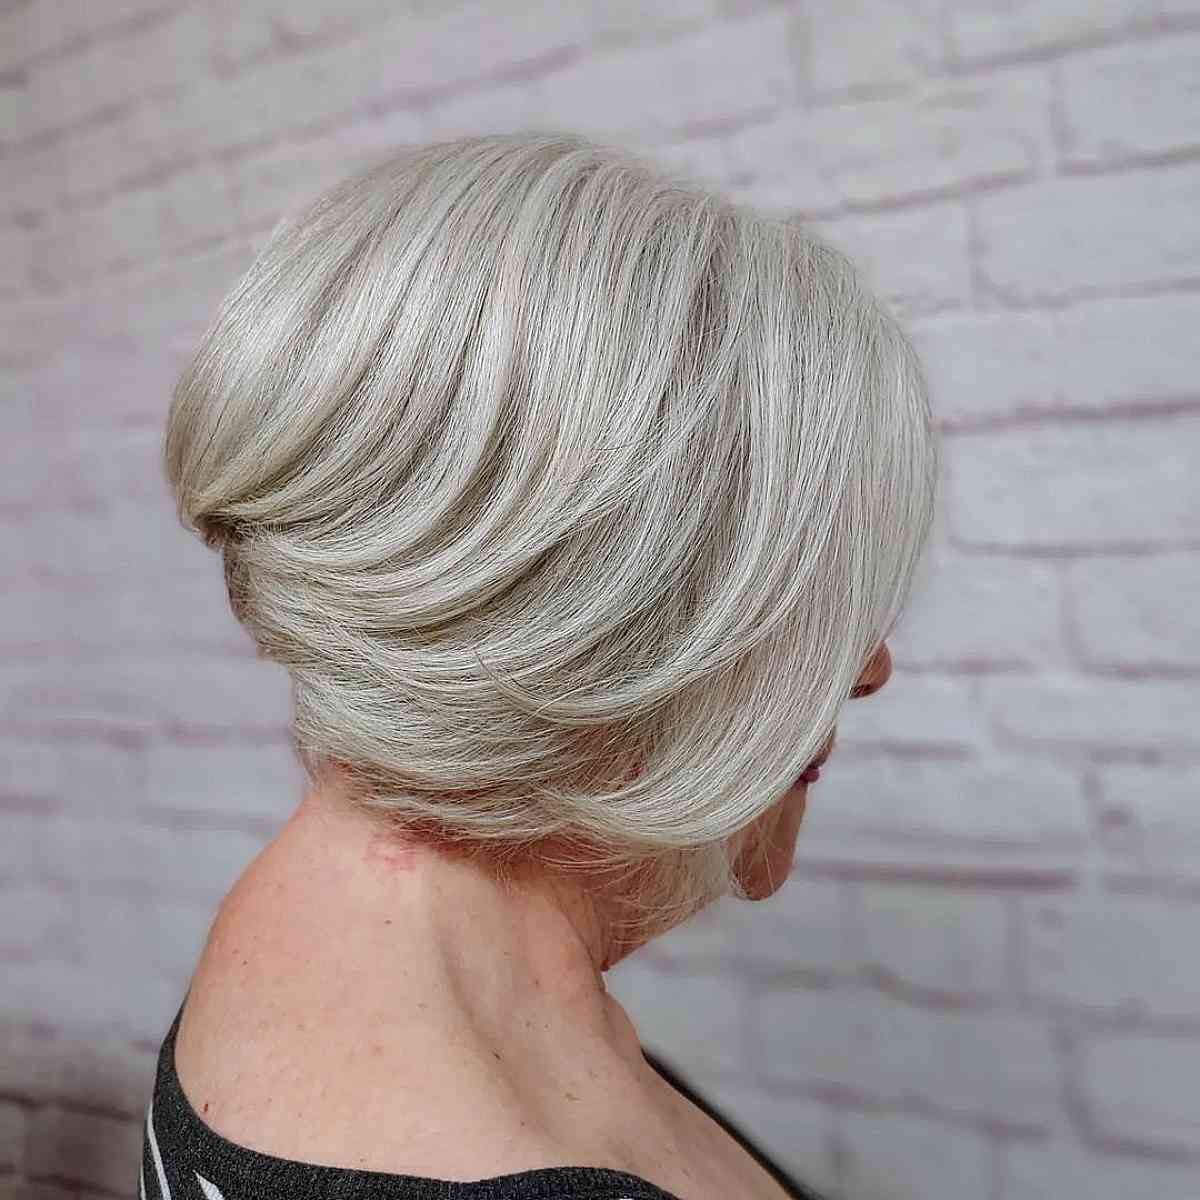 Cool Neck-Length A-Line Bob for a Lady in Her Sixties